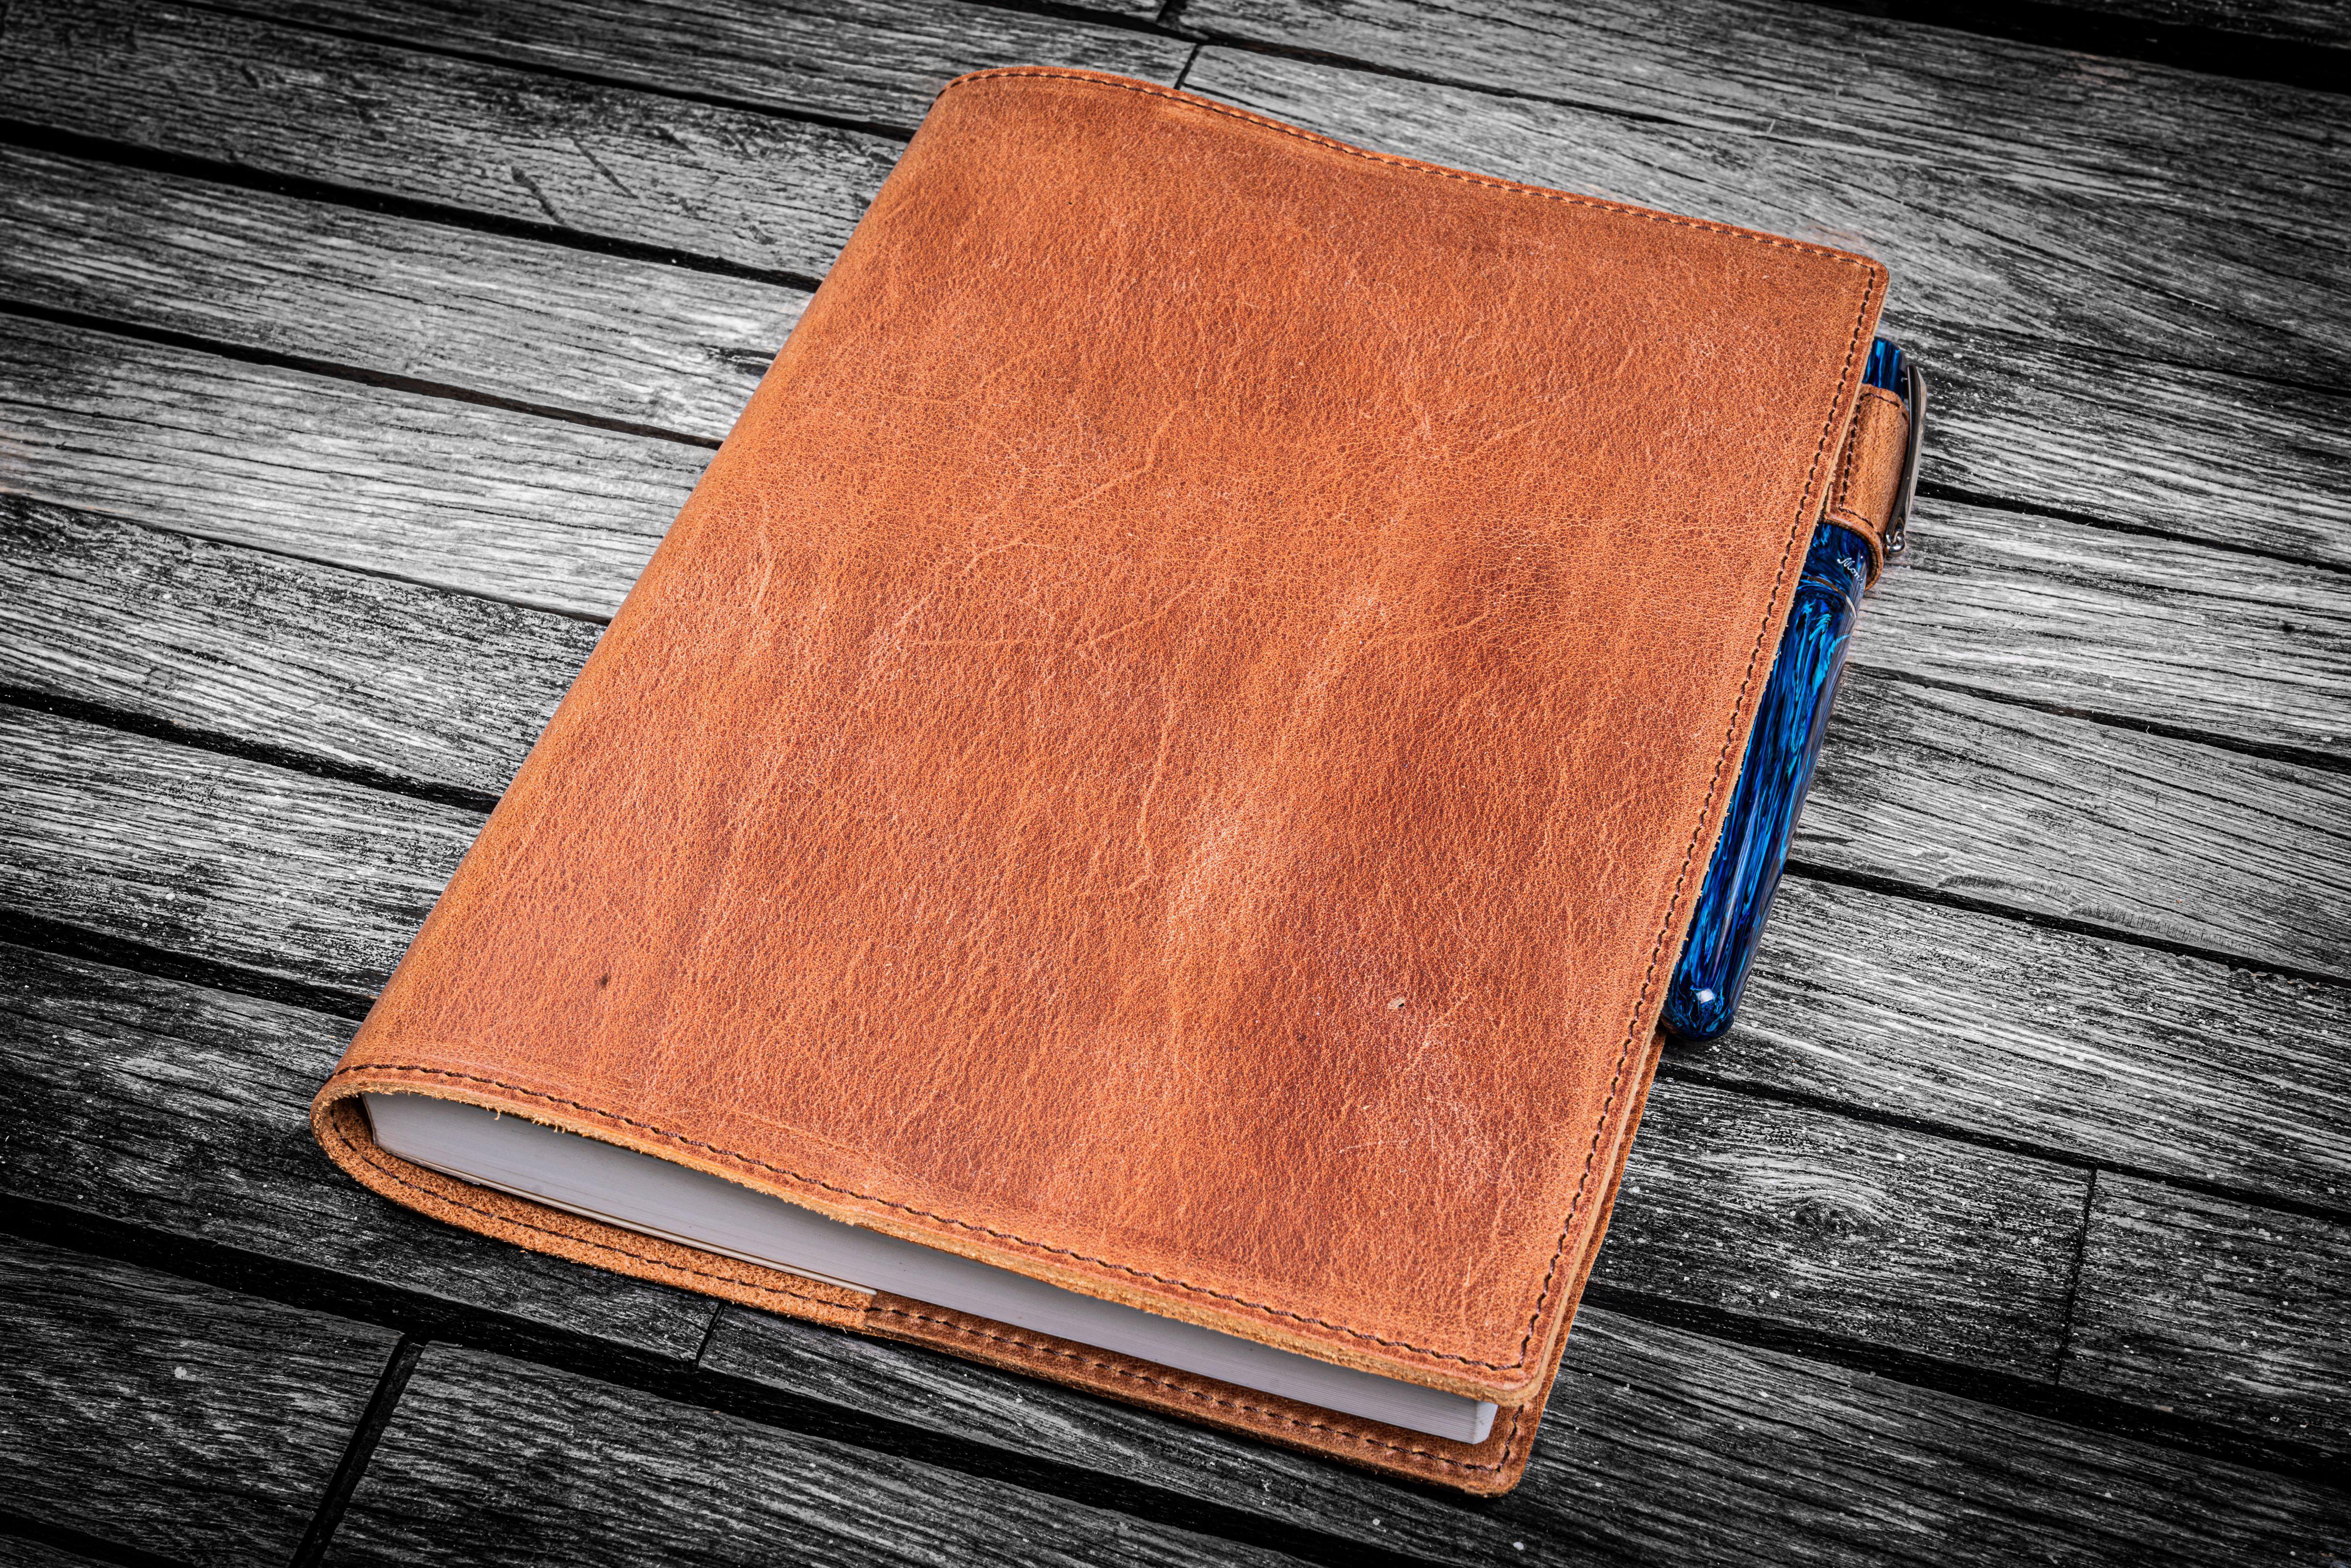 Leather Slim A5 Notebook / Planner Cover - Crazy Horse Tan